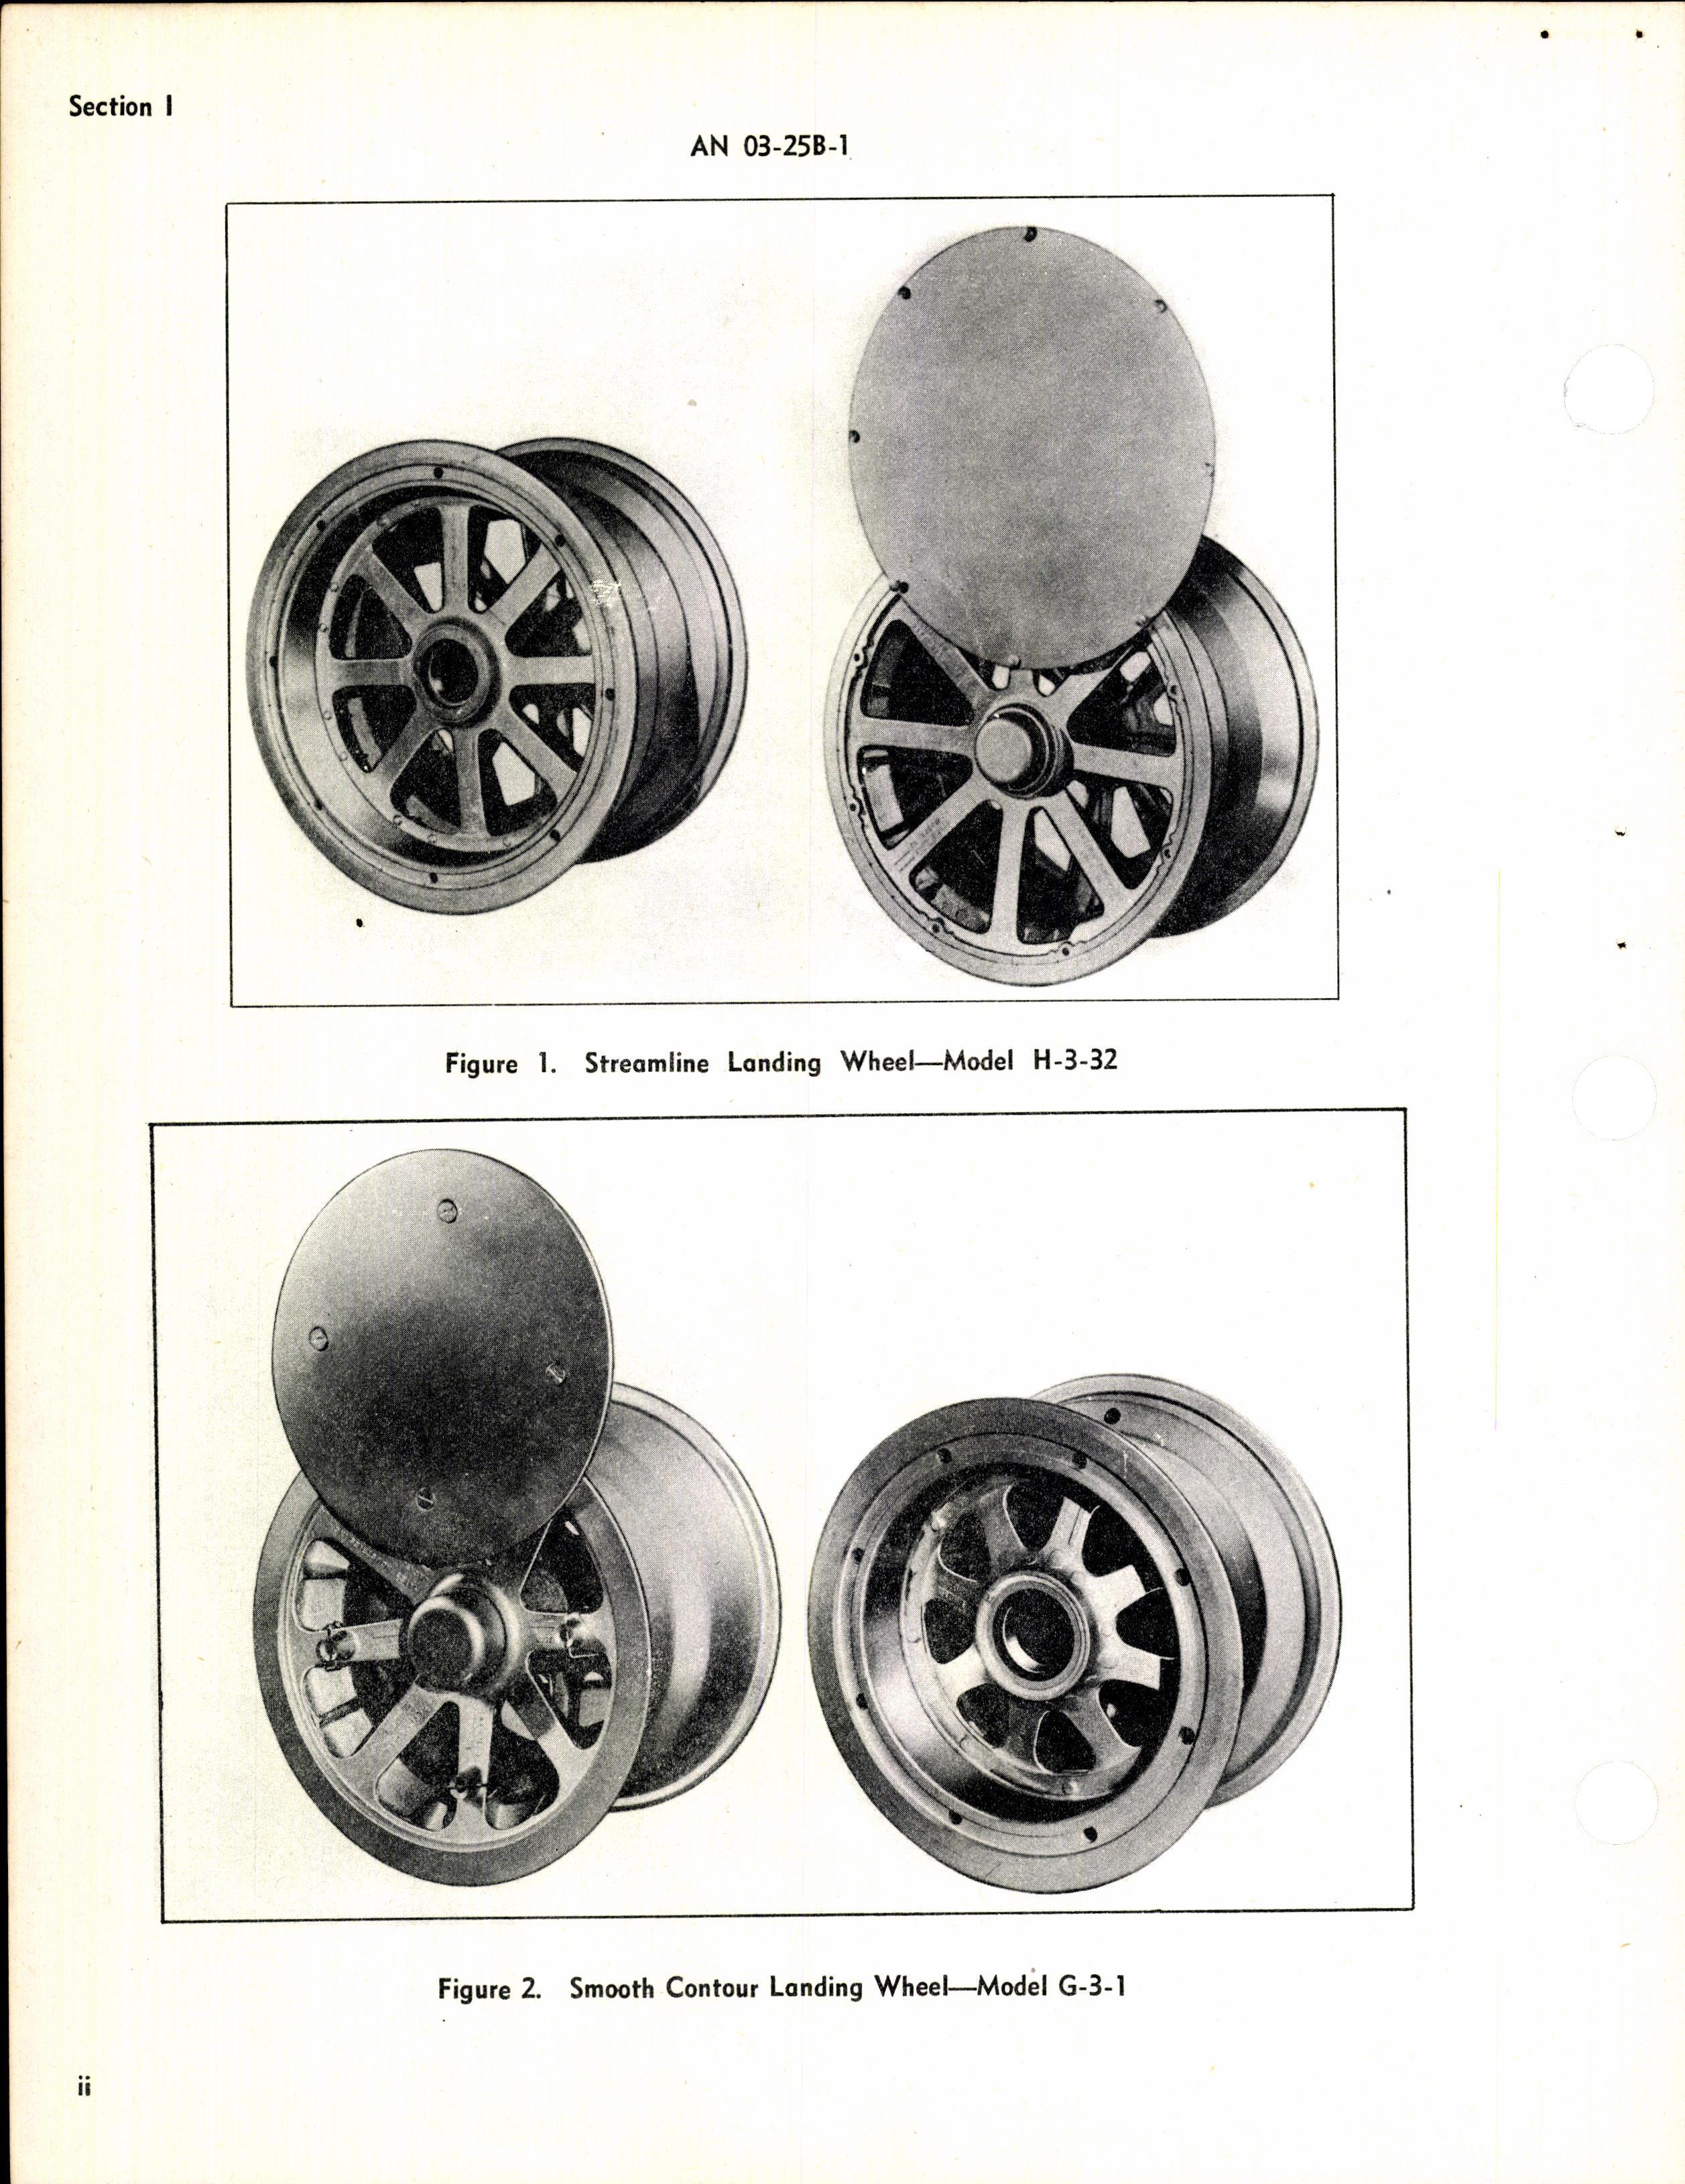 Sample page 4 from AirCorps Library document: Operation, Service, & Overhaul Instructions with Parts Catalog for Main Landing Wheels